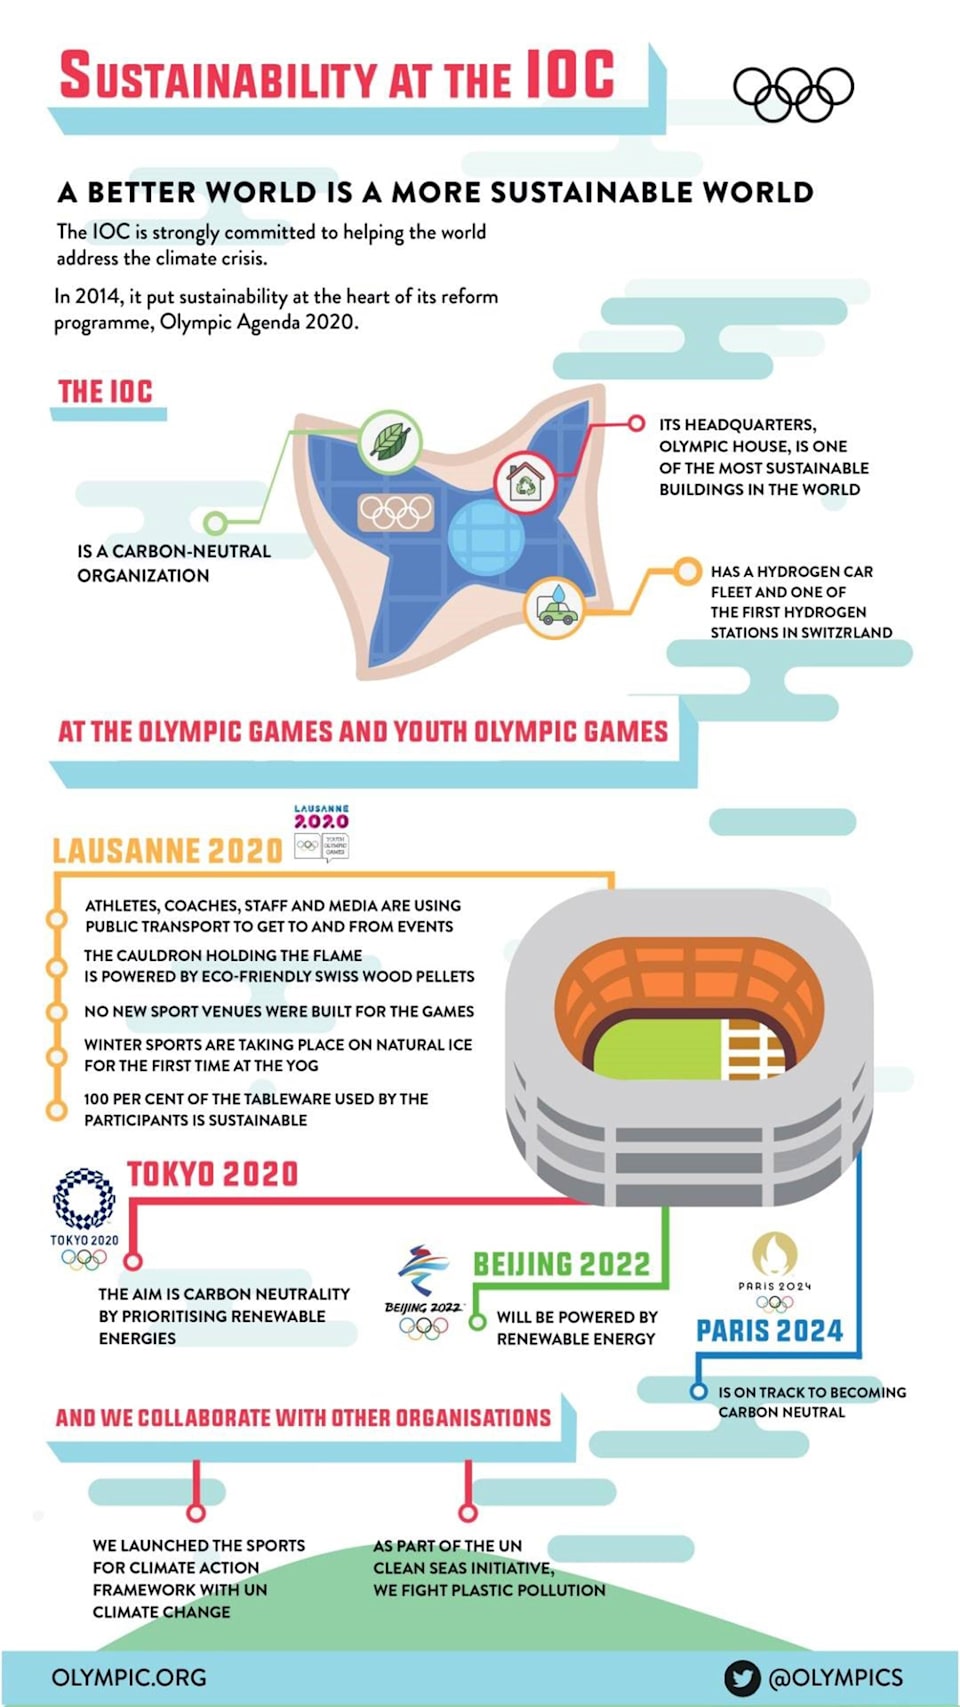 The IOC and the Olympic Games – addressing climate change 